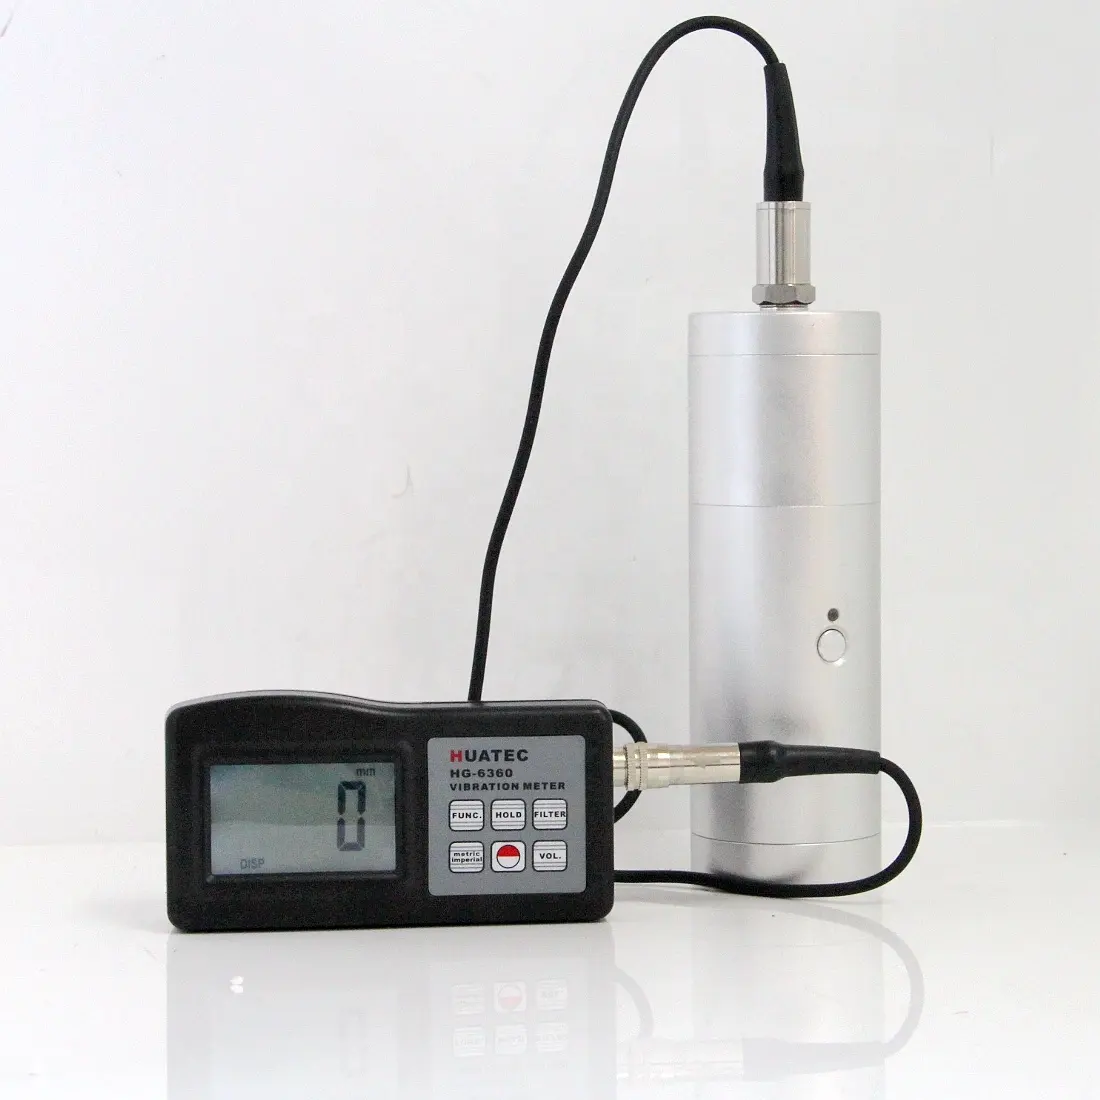 China ndt factory, Vibrometer price, portable digital cheap vibration meter tester for sale HG6360